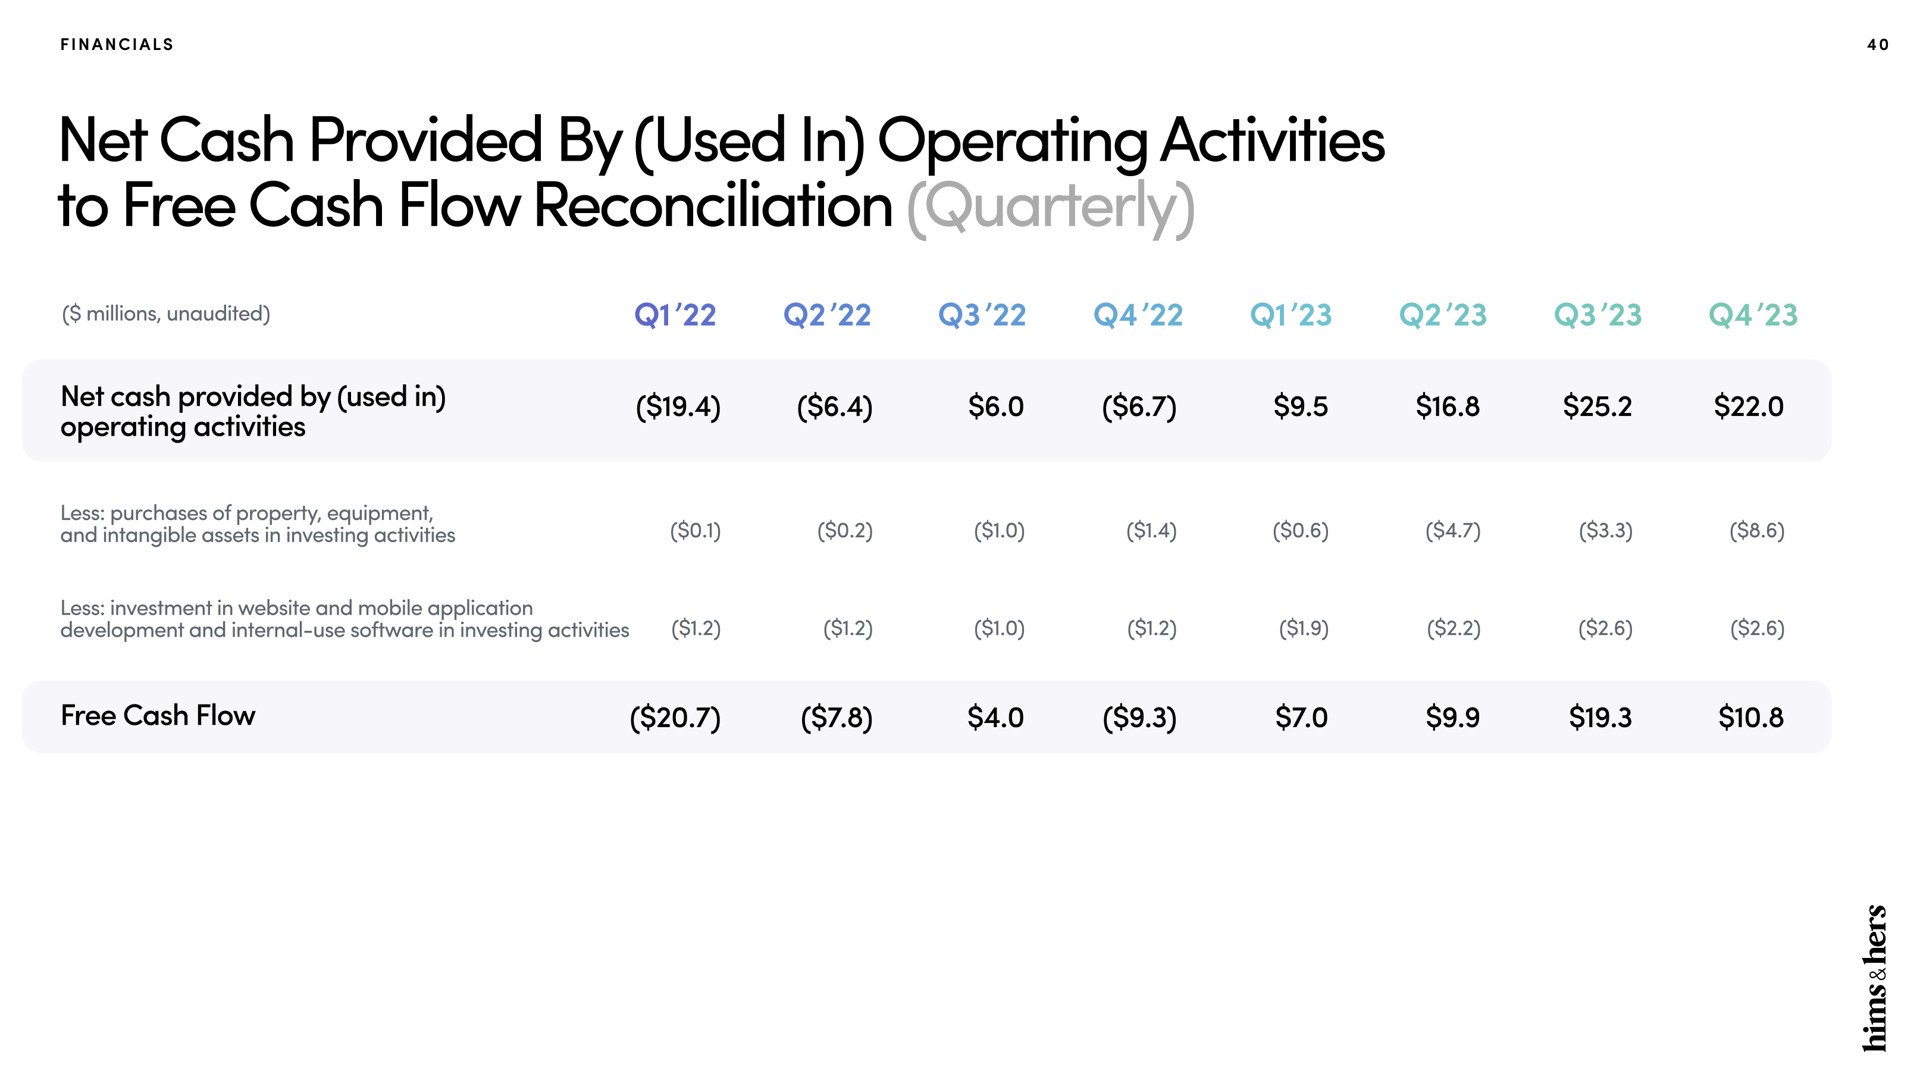 net cash provided by used in operating activities to free cash flow reconciliation quarterly | Hims & Hers